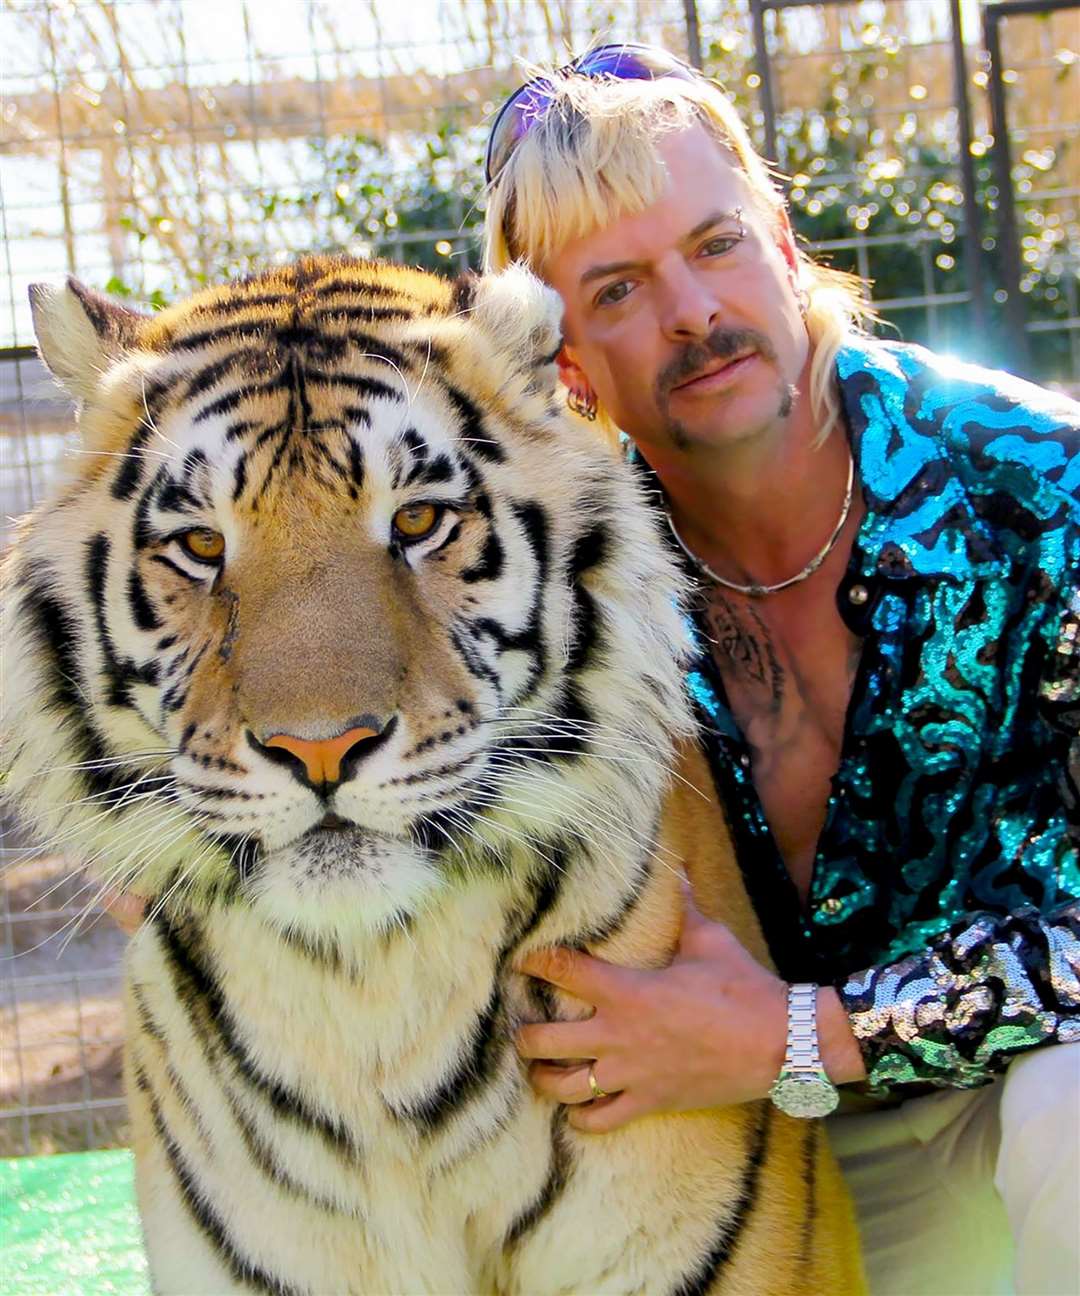 The Tiger King and I